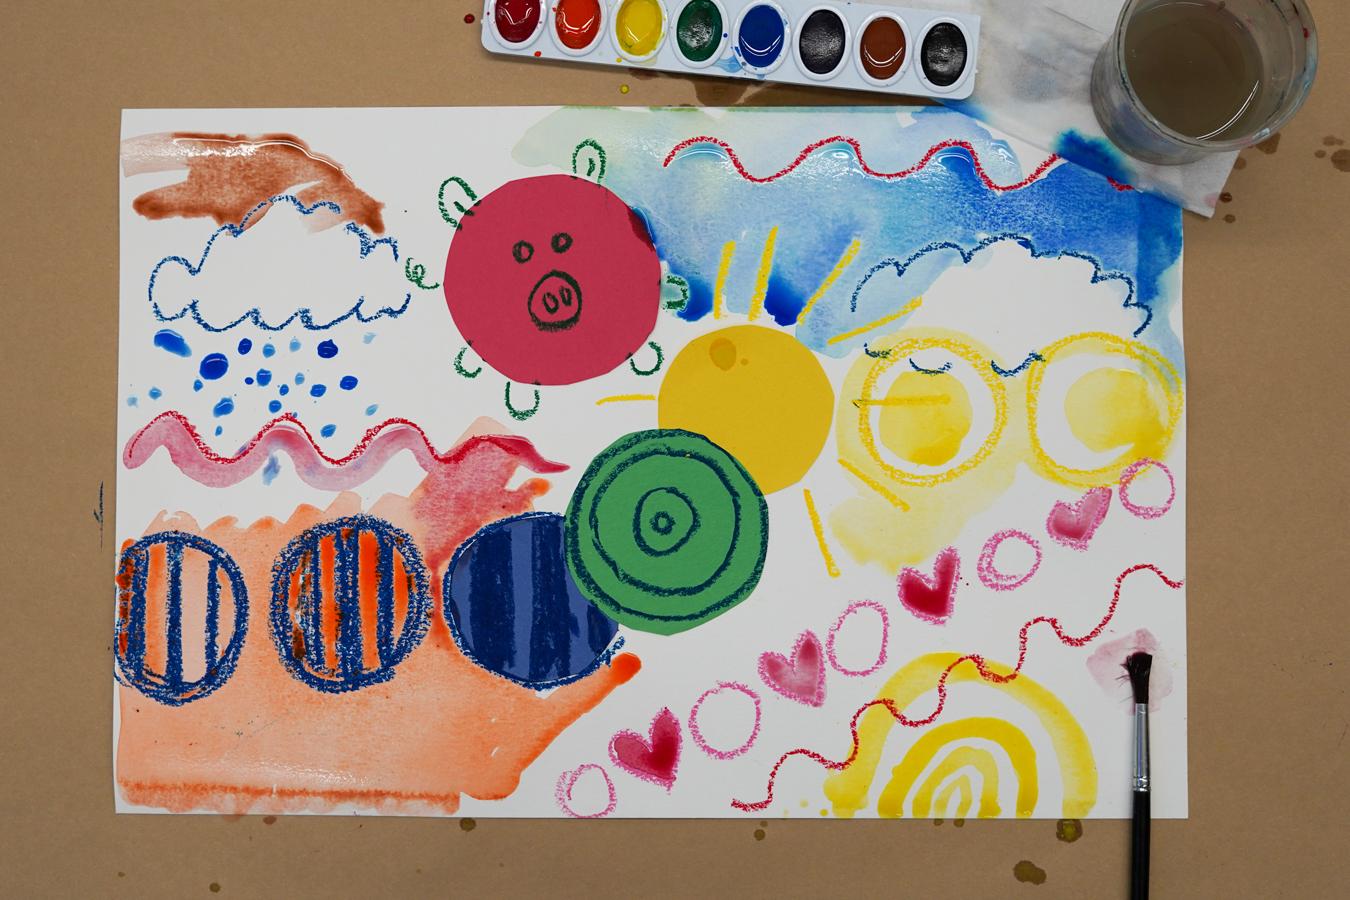 Photo of a piece of paper with colorful construction paper dots on it and colorful doodles as well as colorful watercolors; a set of watercolors, a brush, and a glass of water sit around the paper